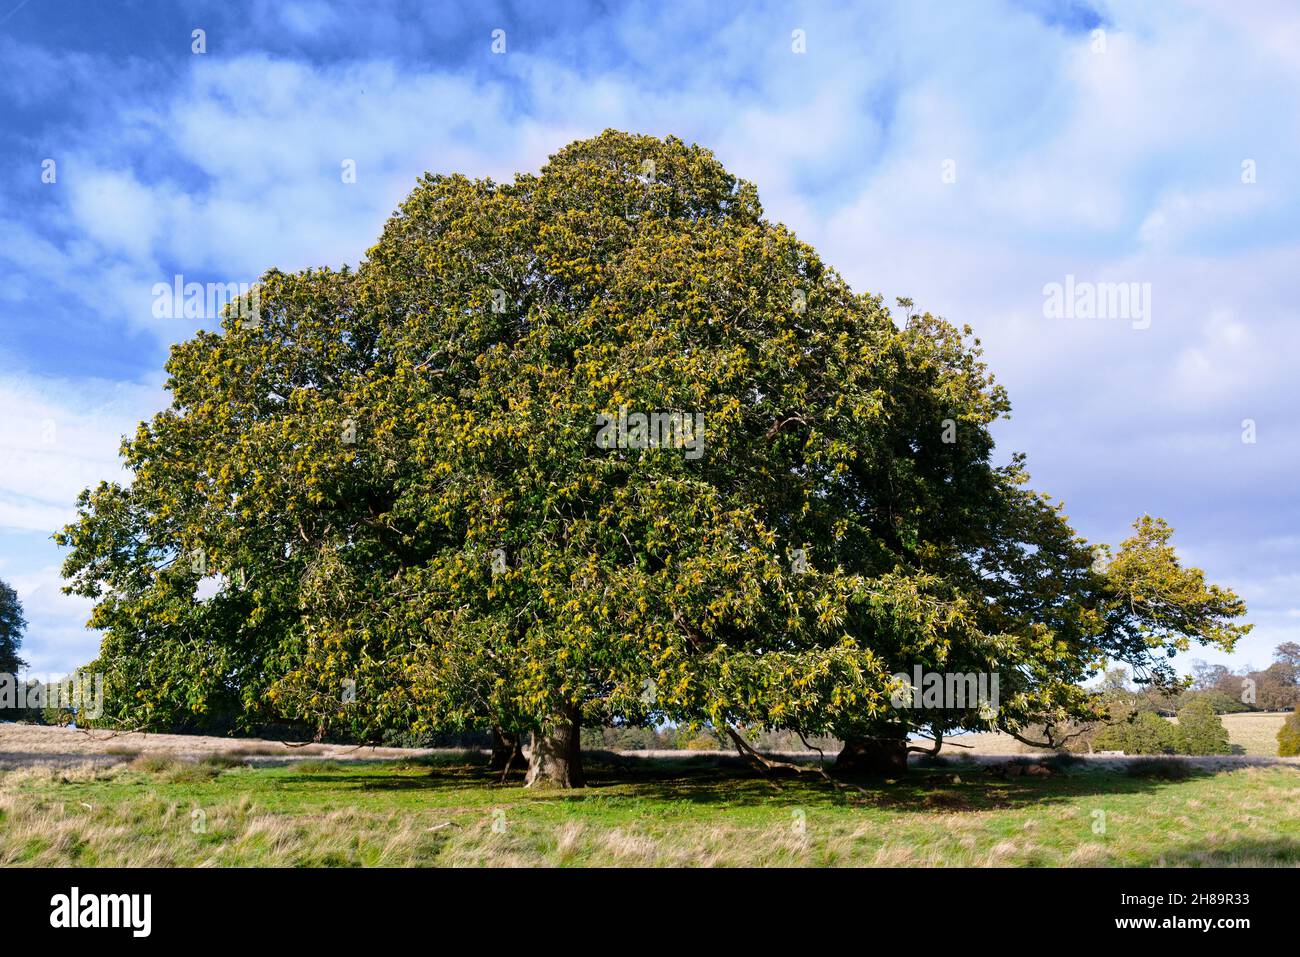 Large, ancient and impressive sweet chestnut tree (Castanea sativa) photographed in autumn, Petworth Park, Petworth, West Sussex, England, UK Stock Photo